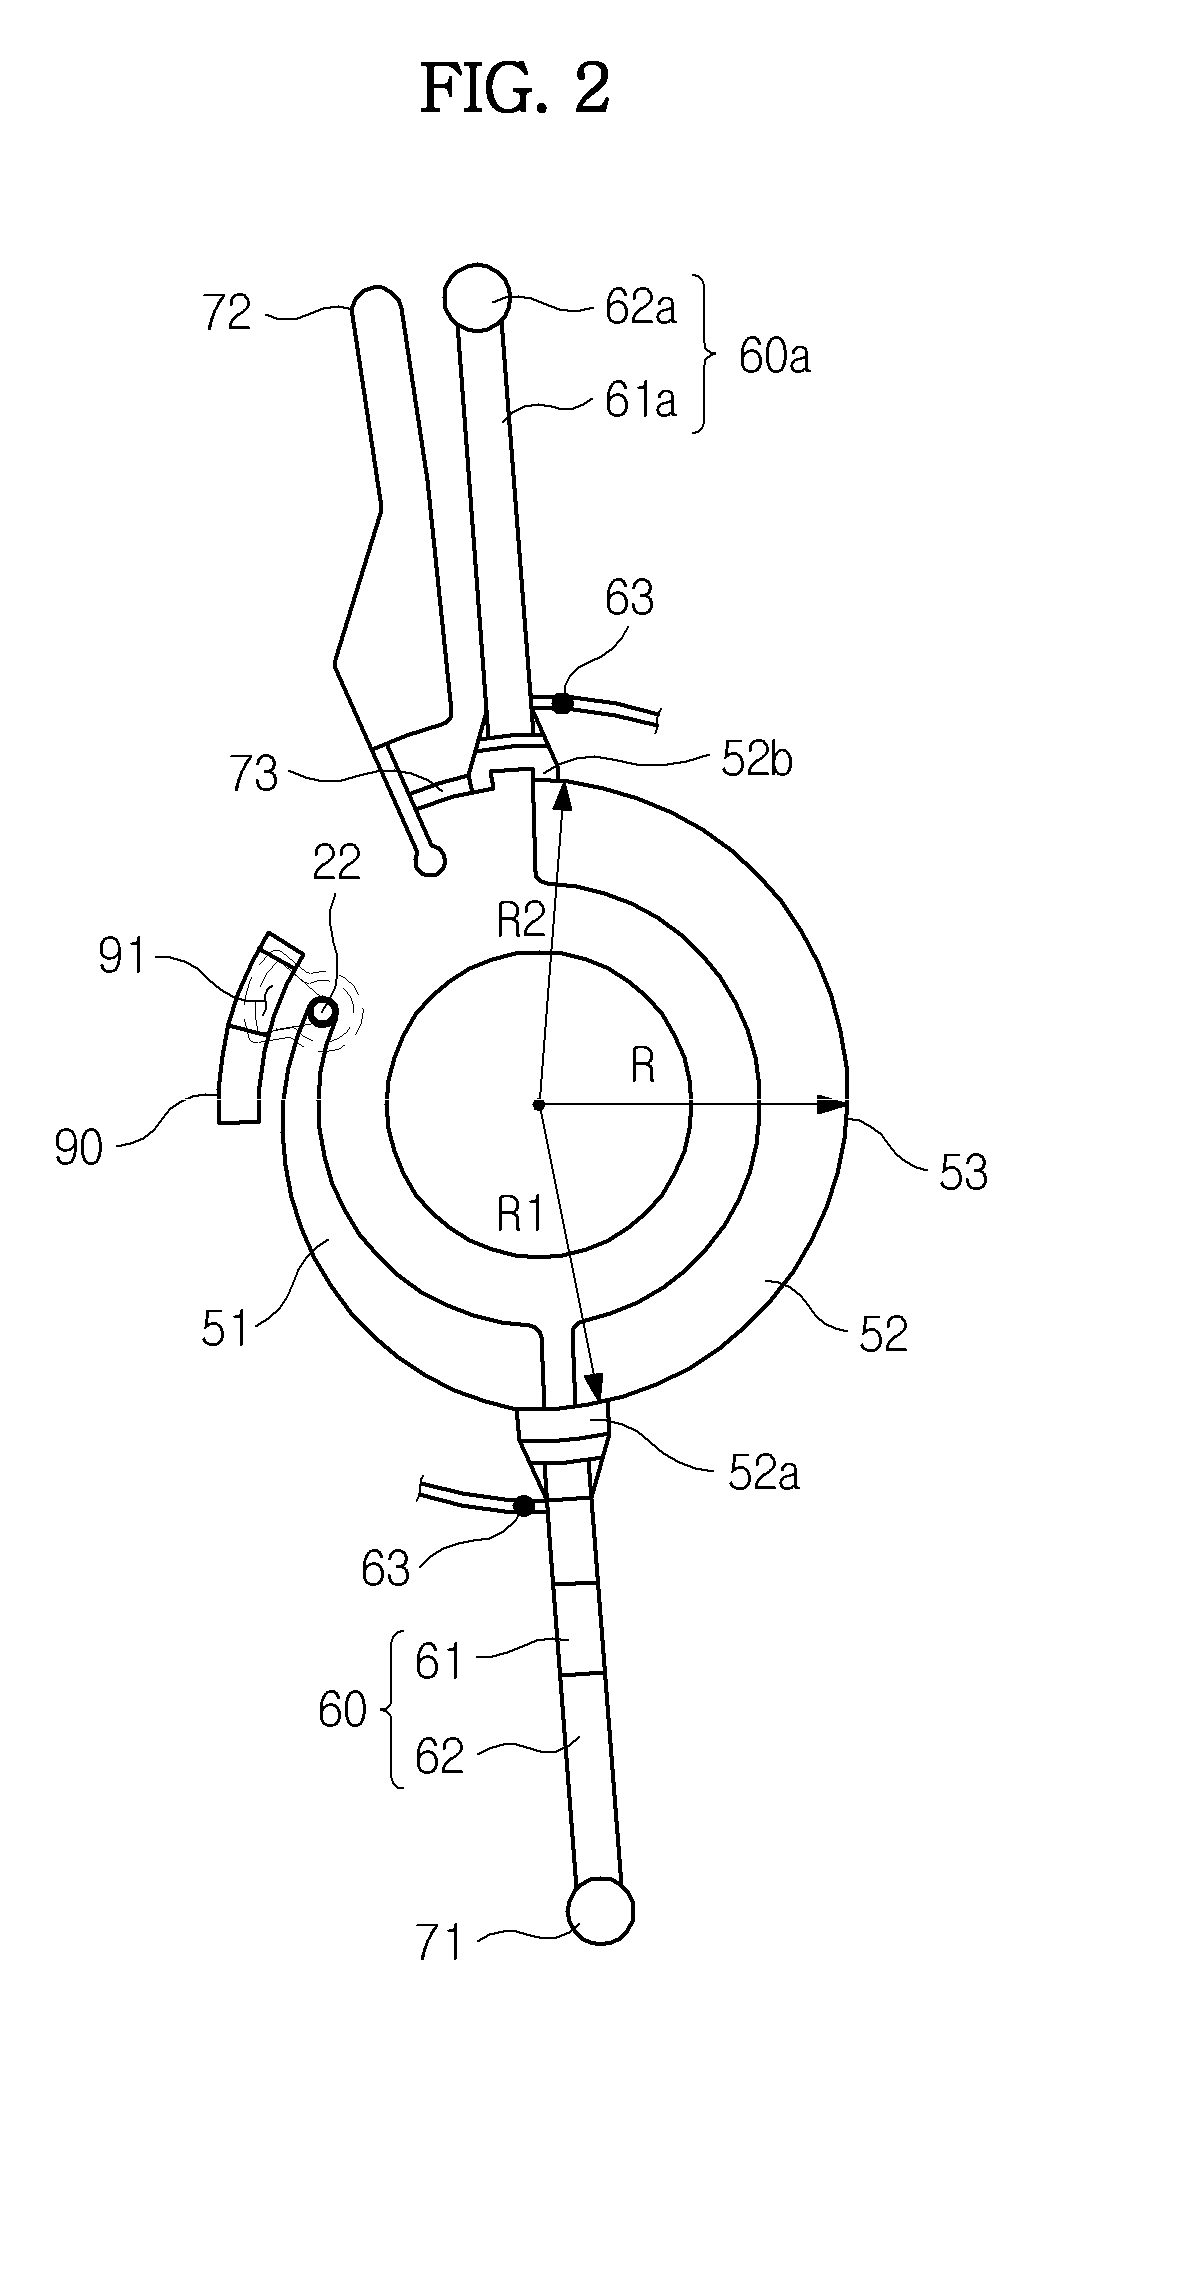 Apparatus for analyzing sample